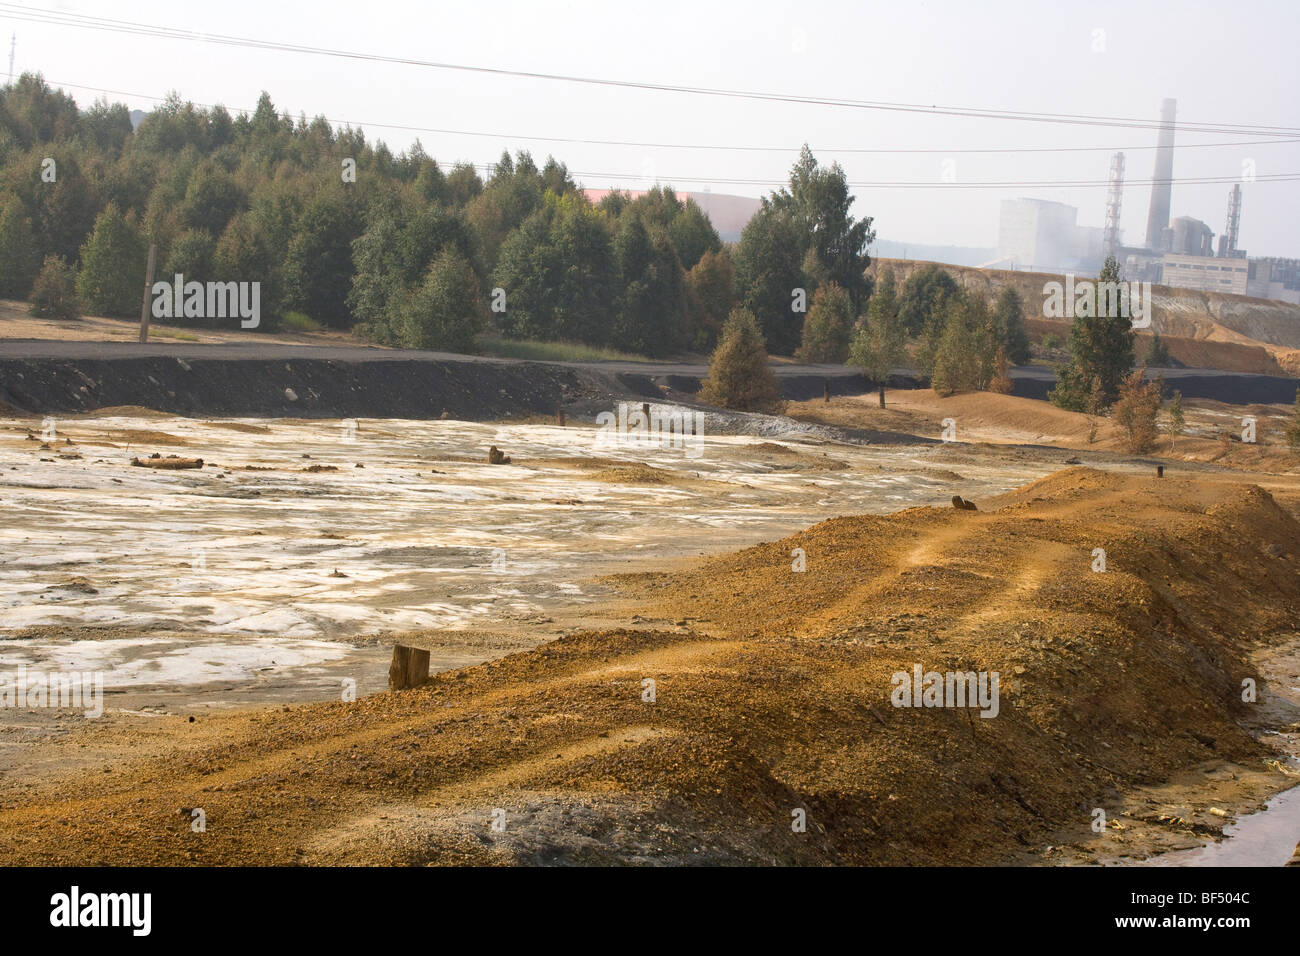 River polluted by toxic chemical waste discharged from nearby factories, Karabash, Ural, Russia Stock Photo